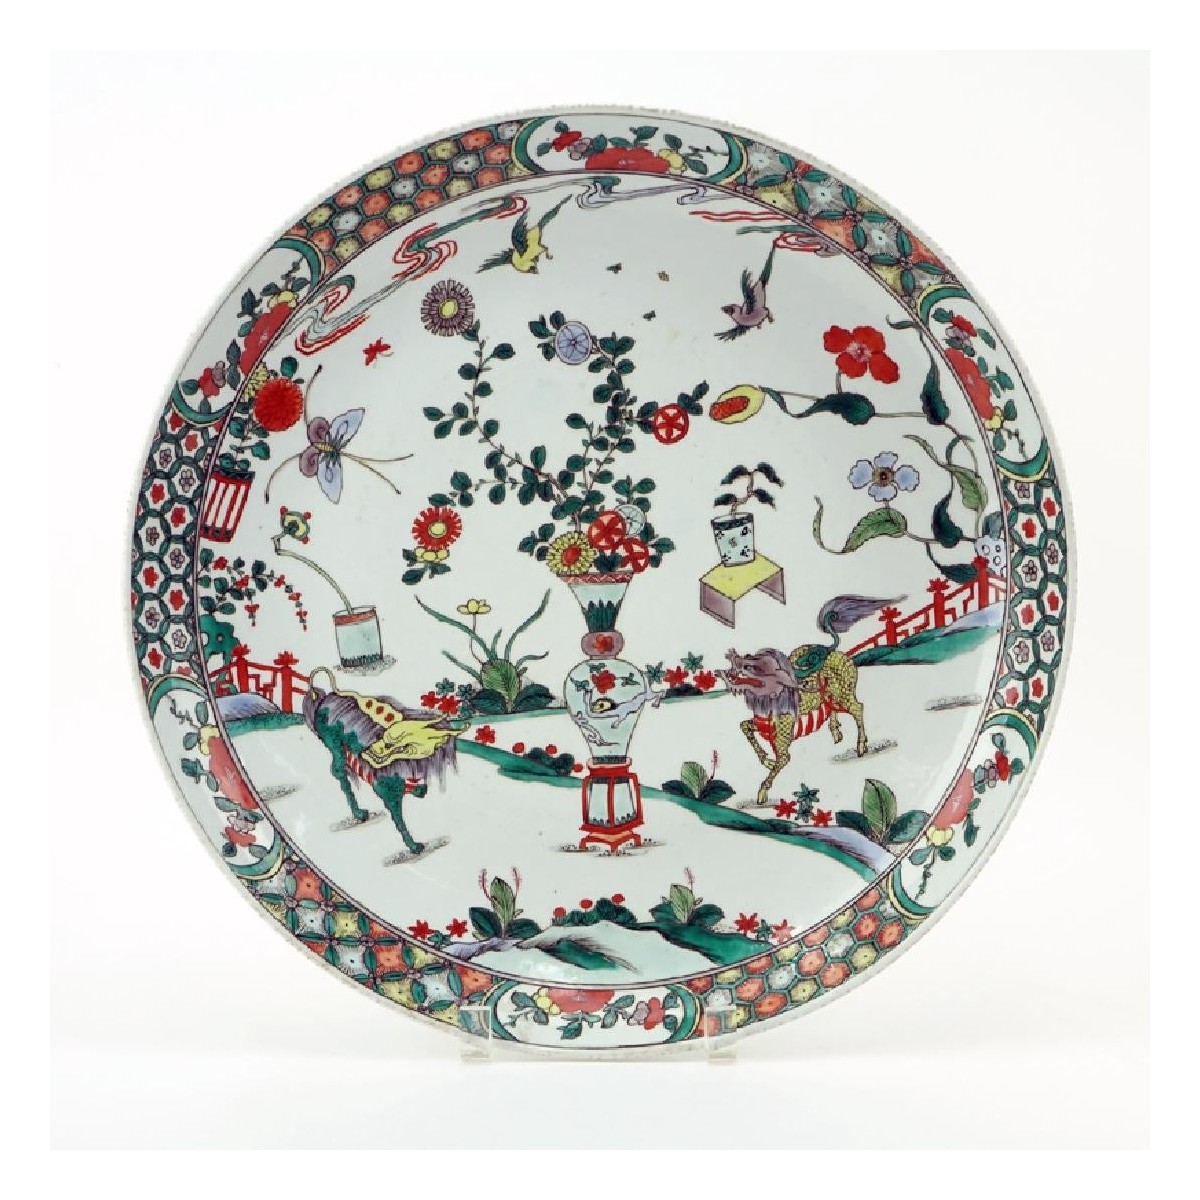 Large Antique Chinese Porcelain Charger